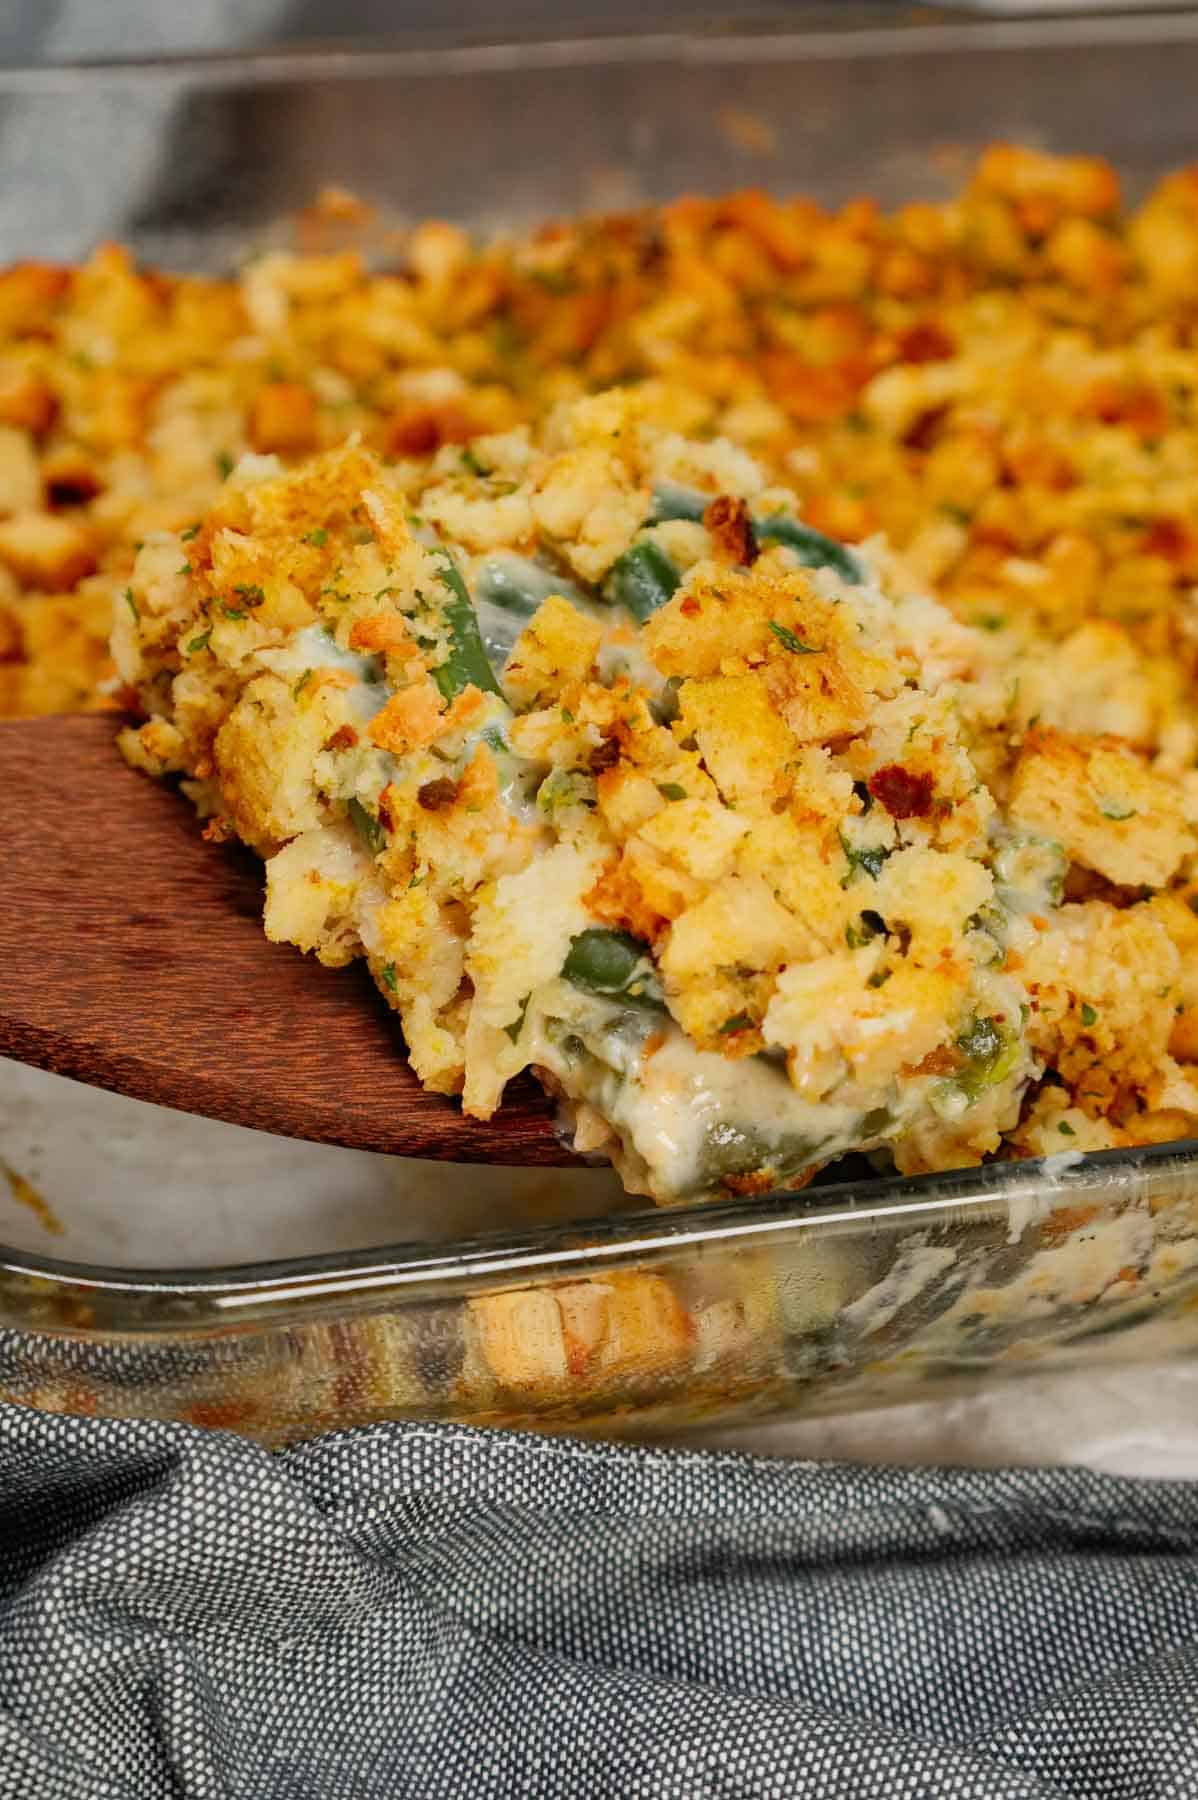 Green Bean Stuffing Casserole is a tasty side dish recipe made with frozen cut green beans, cream of mushroom soup, sour cream, French's crispy fried onions, shredded cheddar cheese, chicken broth and topped with stove top stuffing mix.